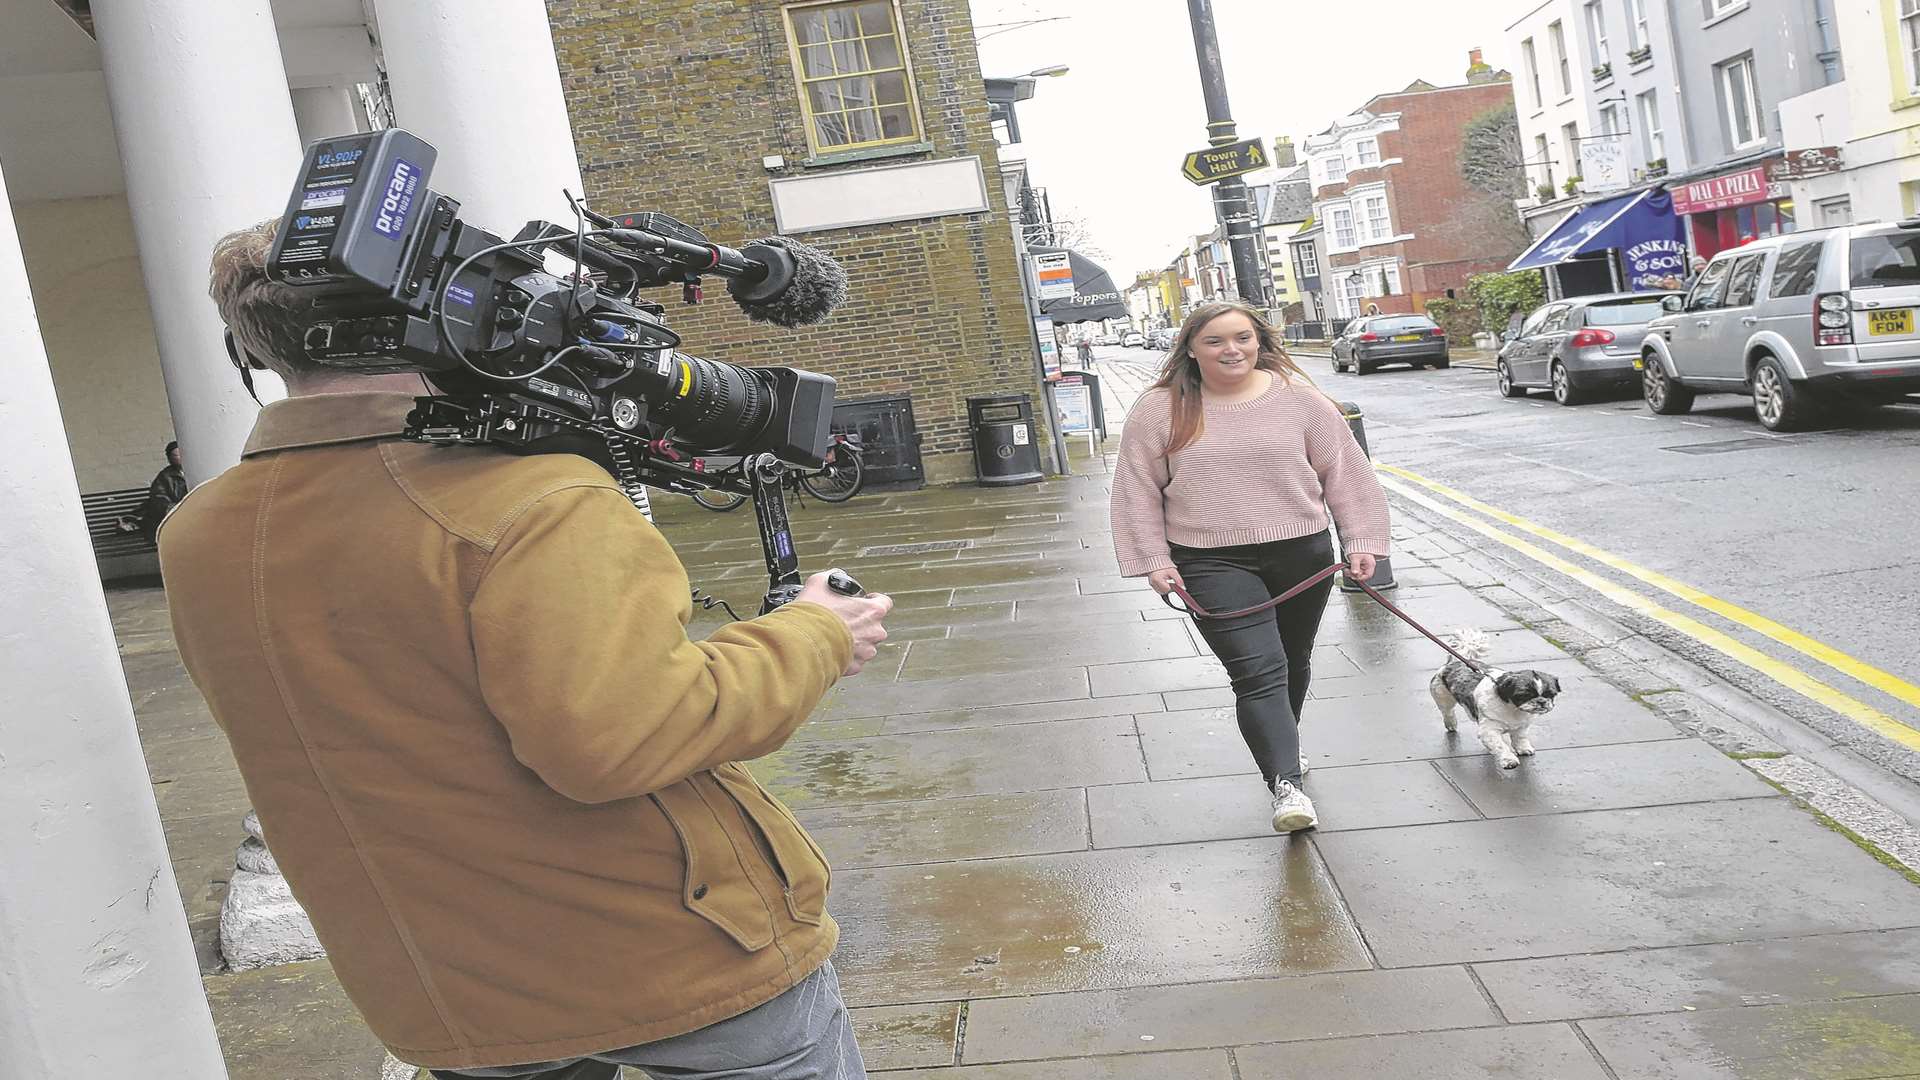 Josie and Jack were filmed outside Deal Town Hall